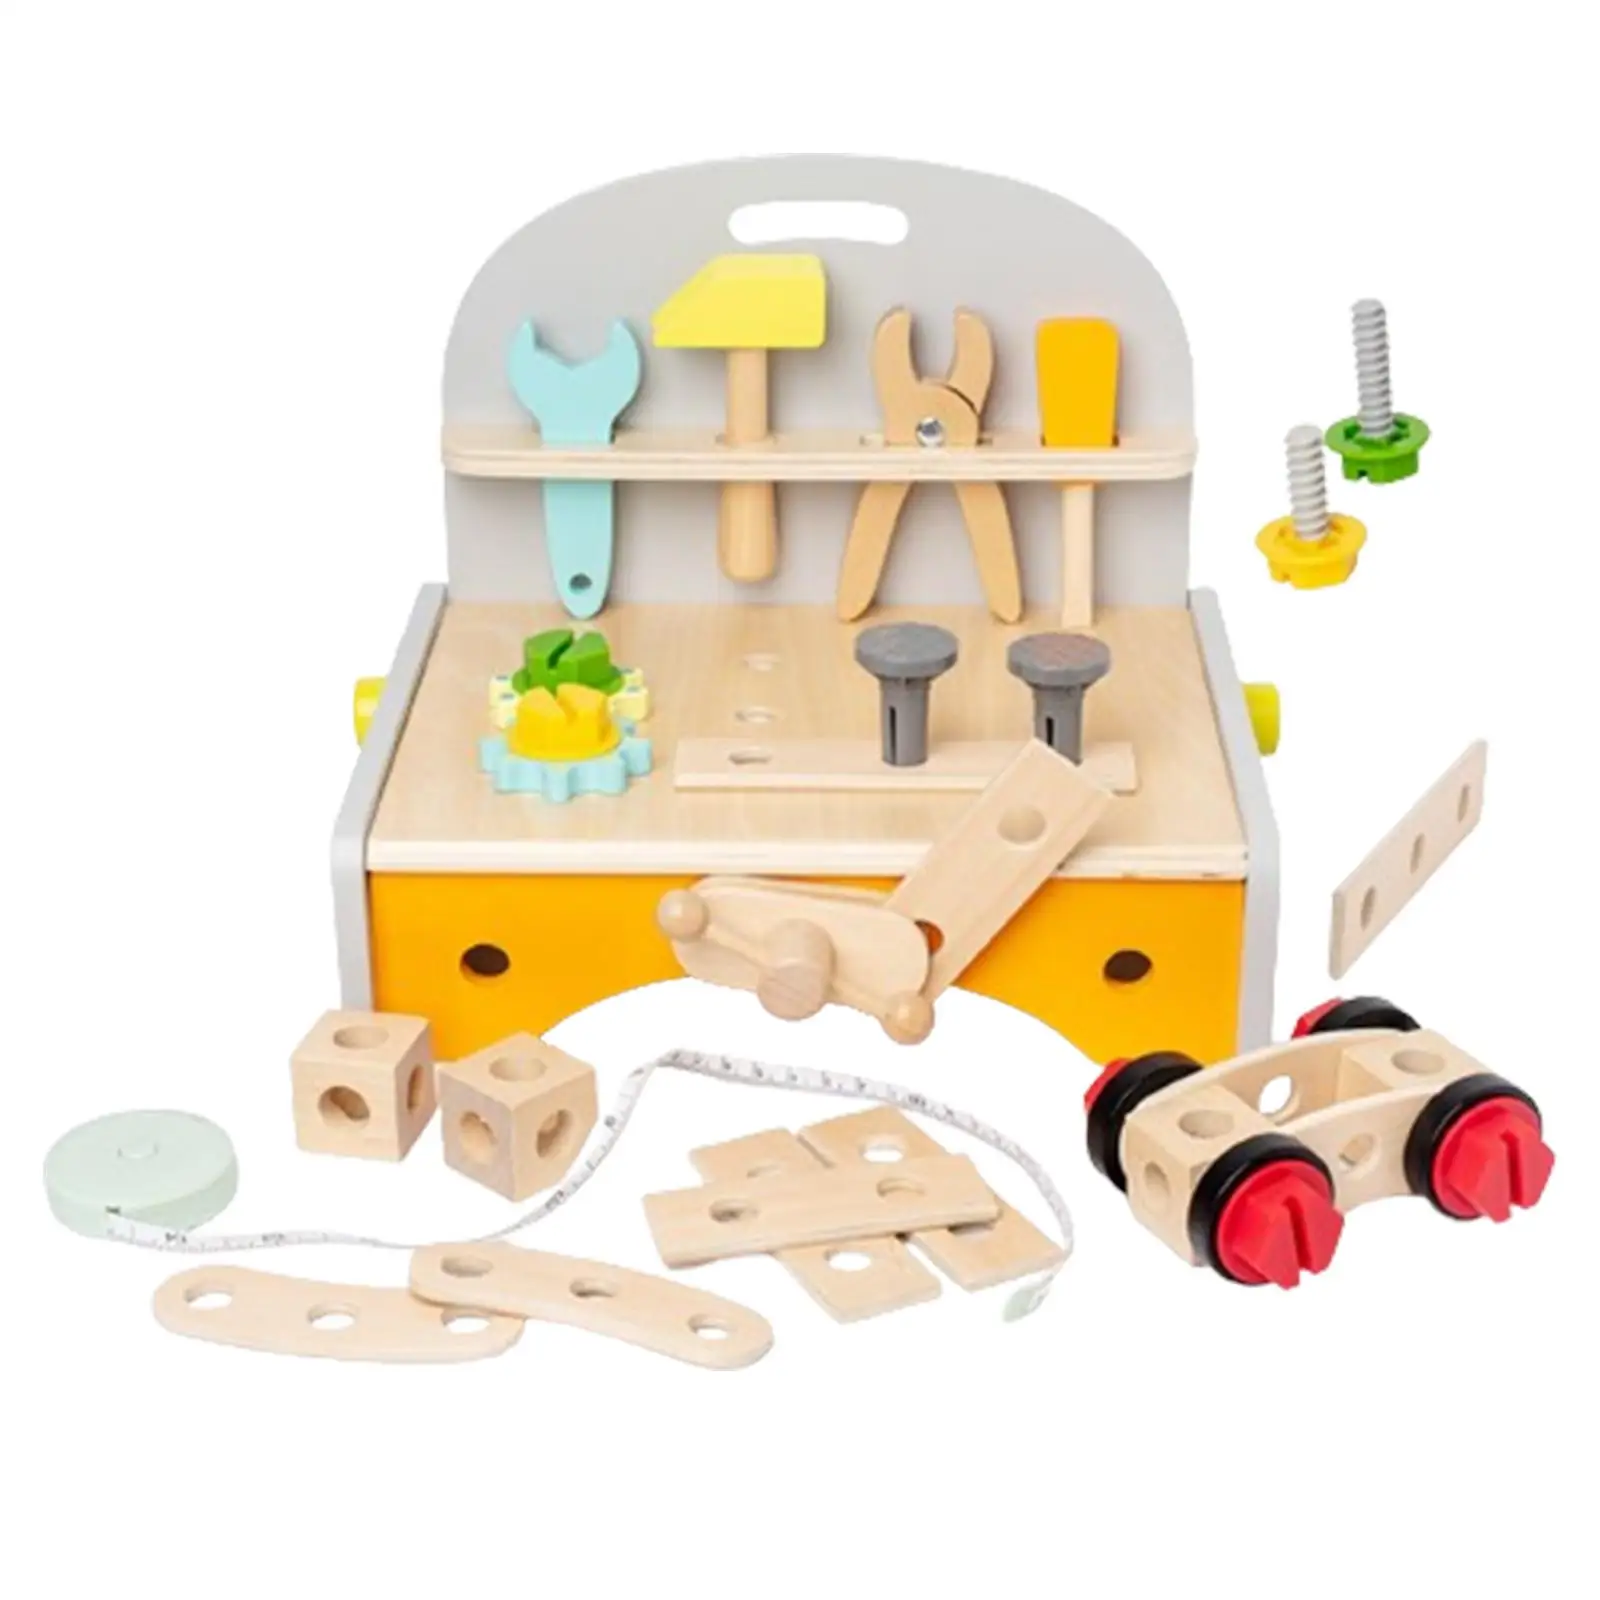 

Montessori Wooden Tool Set Toy Role Play Fine Motor Skill Disassembly Toy Early Educational Children's Construction Tool